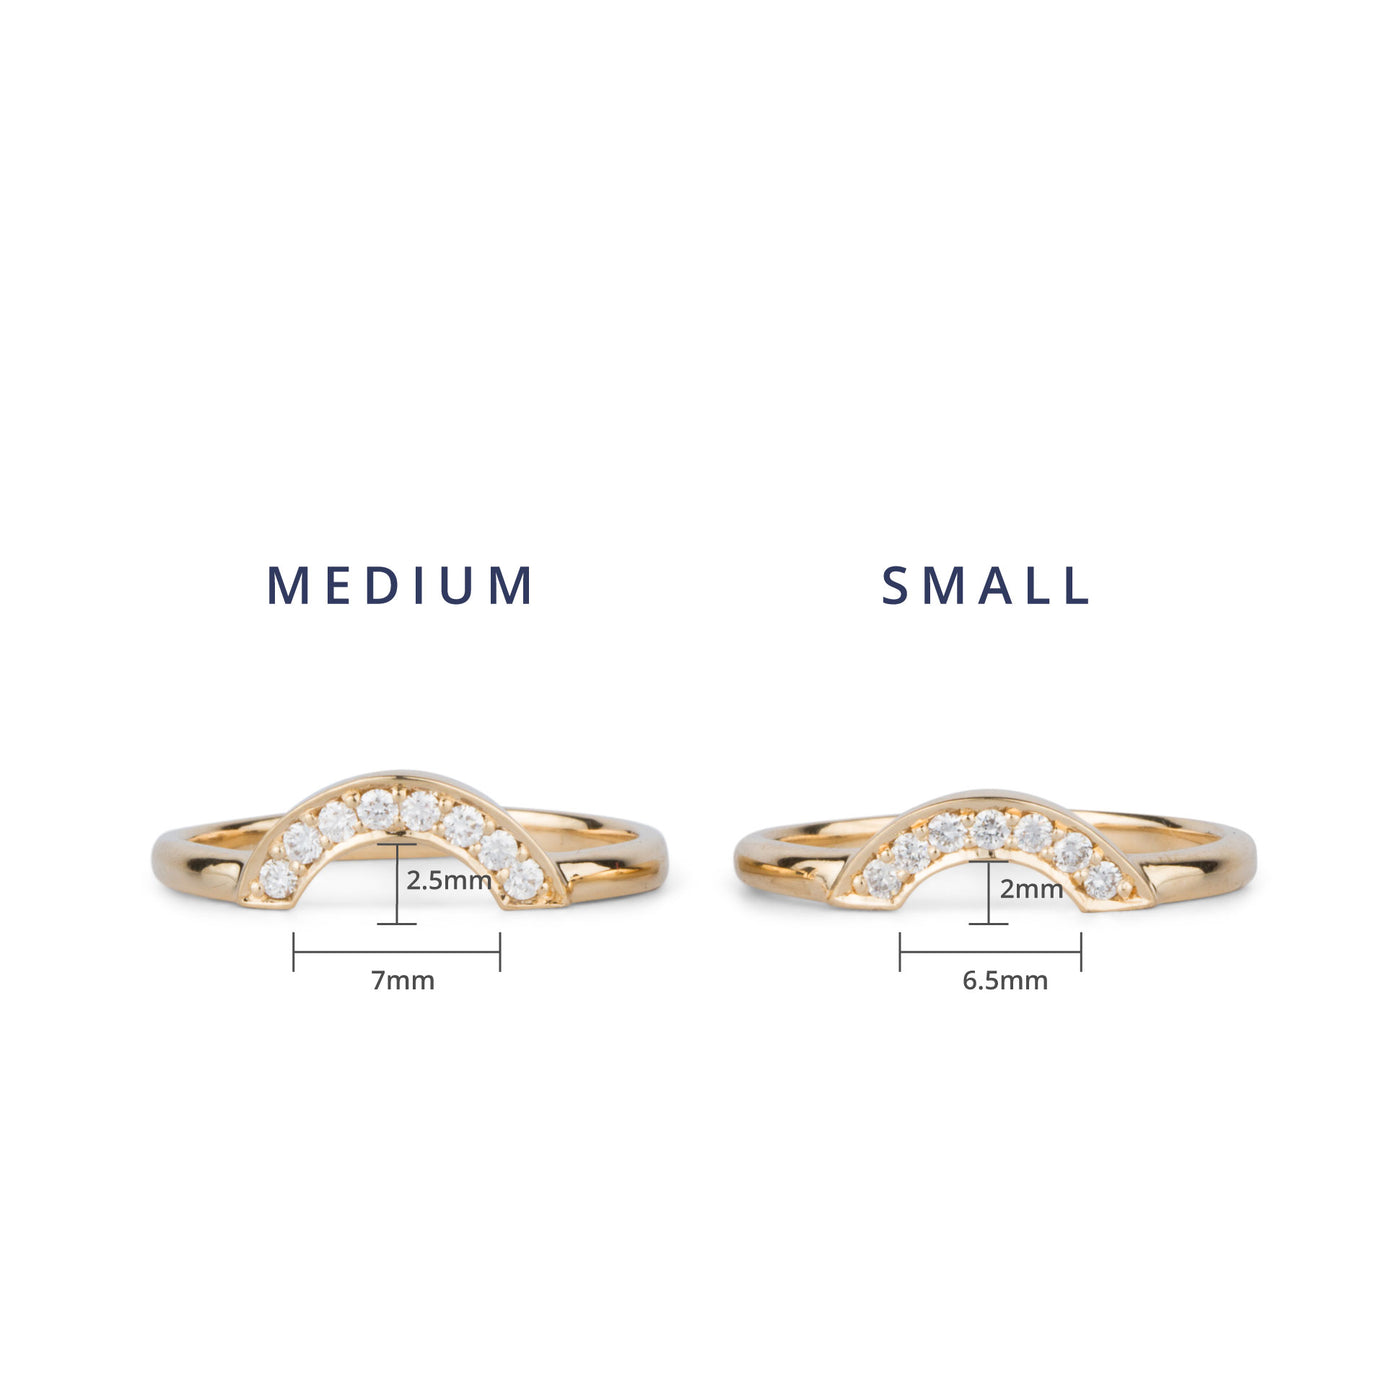 meidum vs small pave diamond arch band dimensions